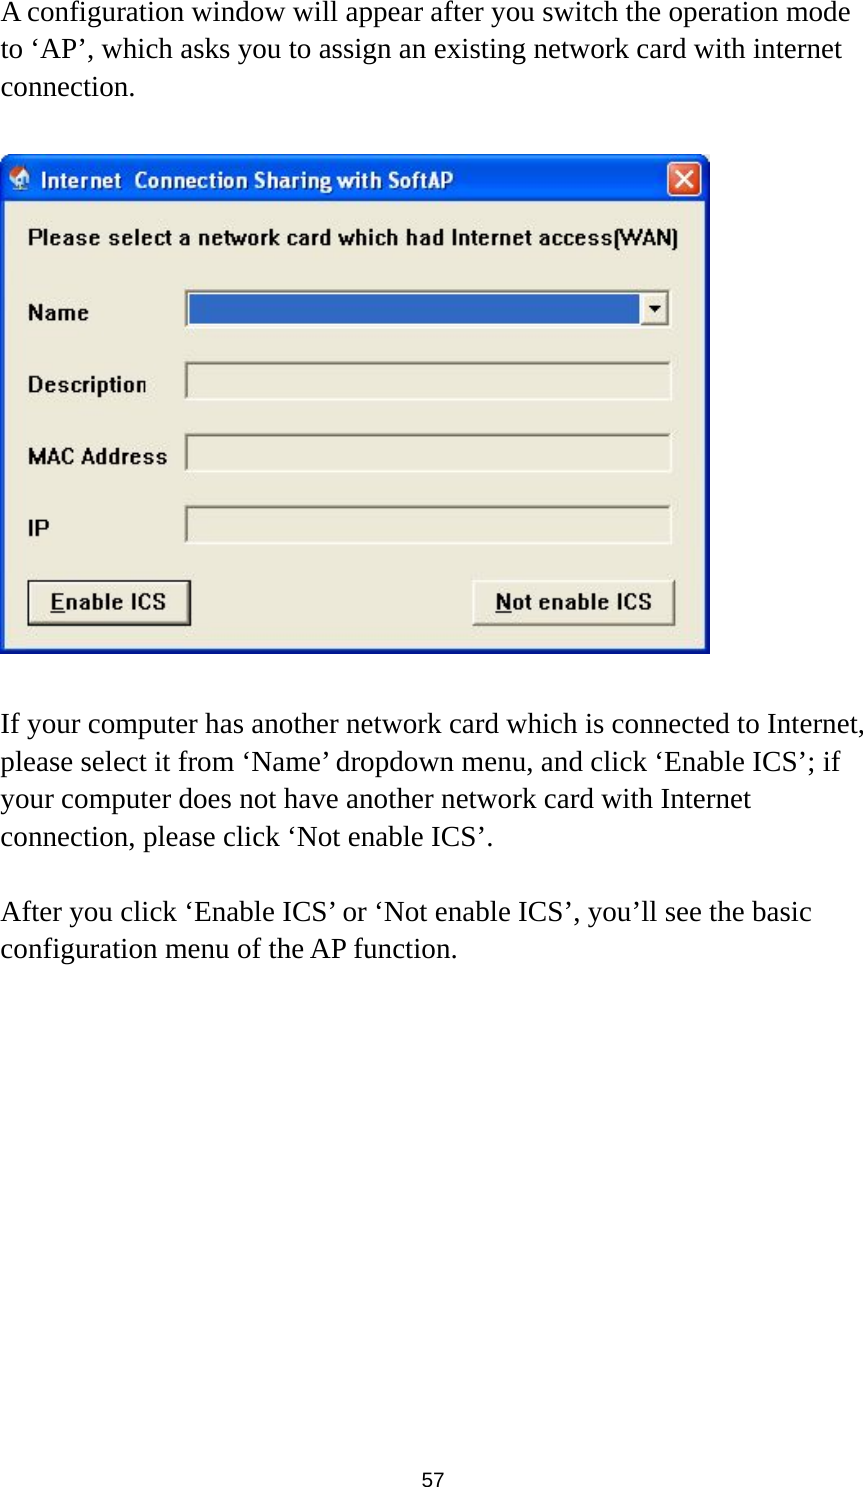  57 A configuration window will appear after you switch the operation mode to ‘AP’, which asks you to assign an existing network card with internet connection.    If your computer has another network card which is connected to Internet, please select it from ‘Name’ dropdown menu, and click ‘Enable ICS’; if your computer does not have another network card with Internet connection, please click ‘Not enable ICS’.      After you click ‘Enable ICS’ or ‘Not enable ICS’, you’ll see the basic configuration menu of the AP function.  